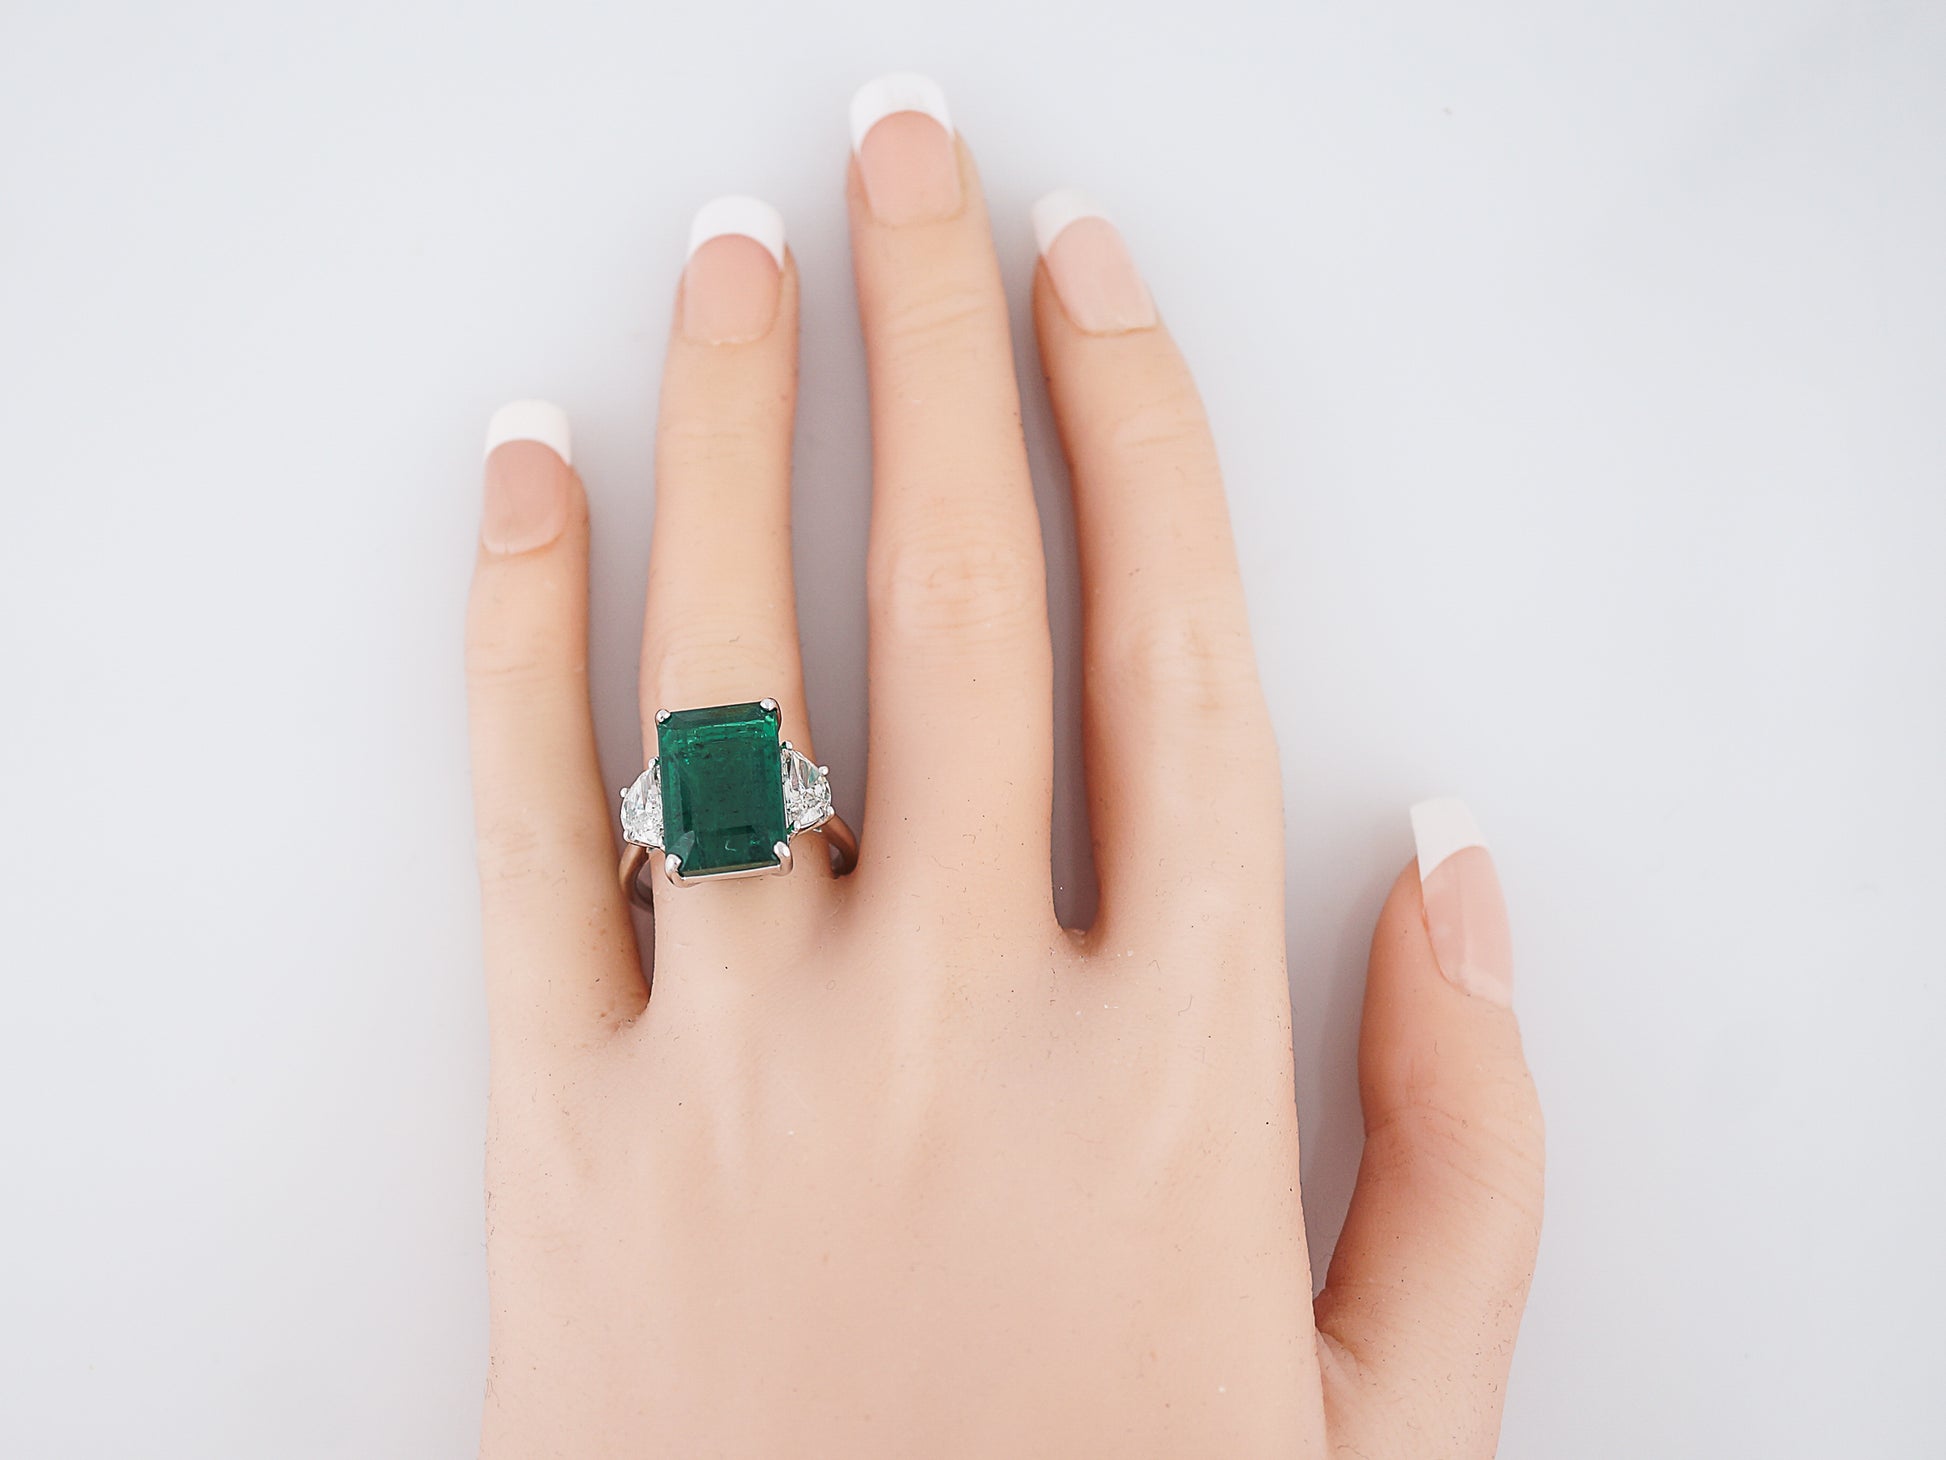 Right Hand Ring Modern 10.02 GIA Certified Octagonal Step Cut Emerald & 1.24 Half moon Cut Diamonds in 14k White Gold